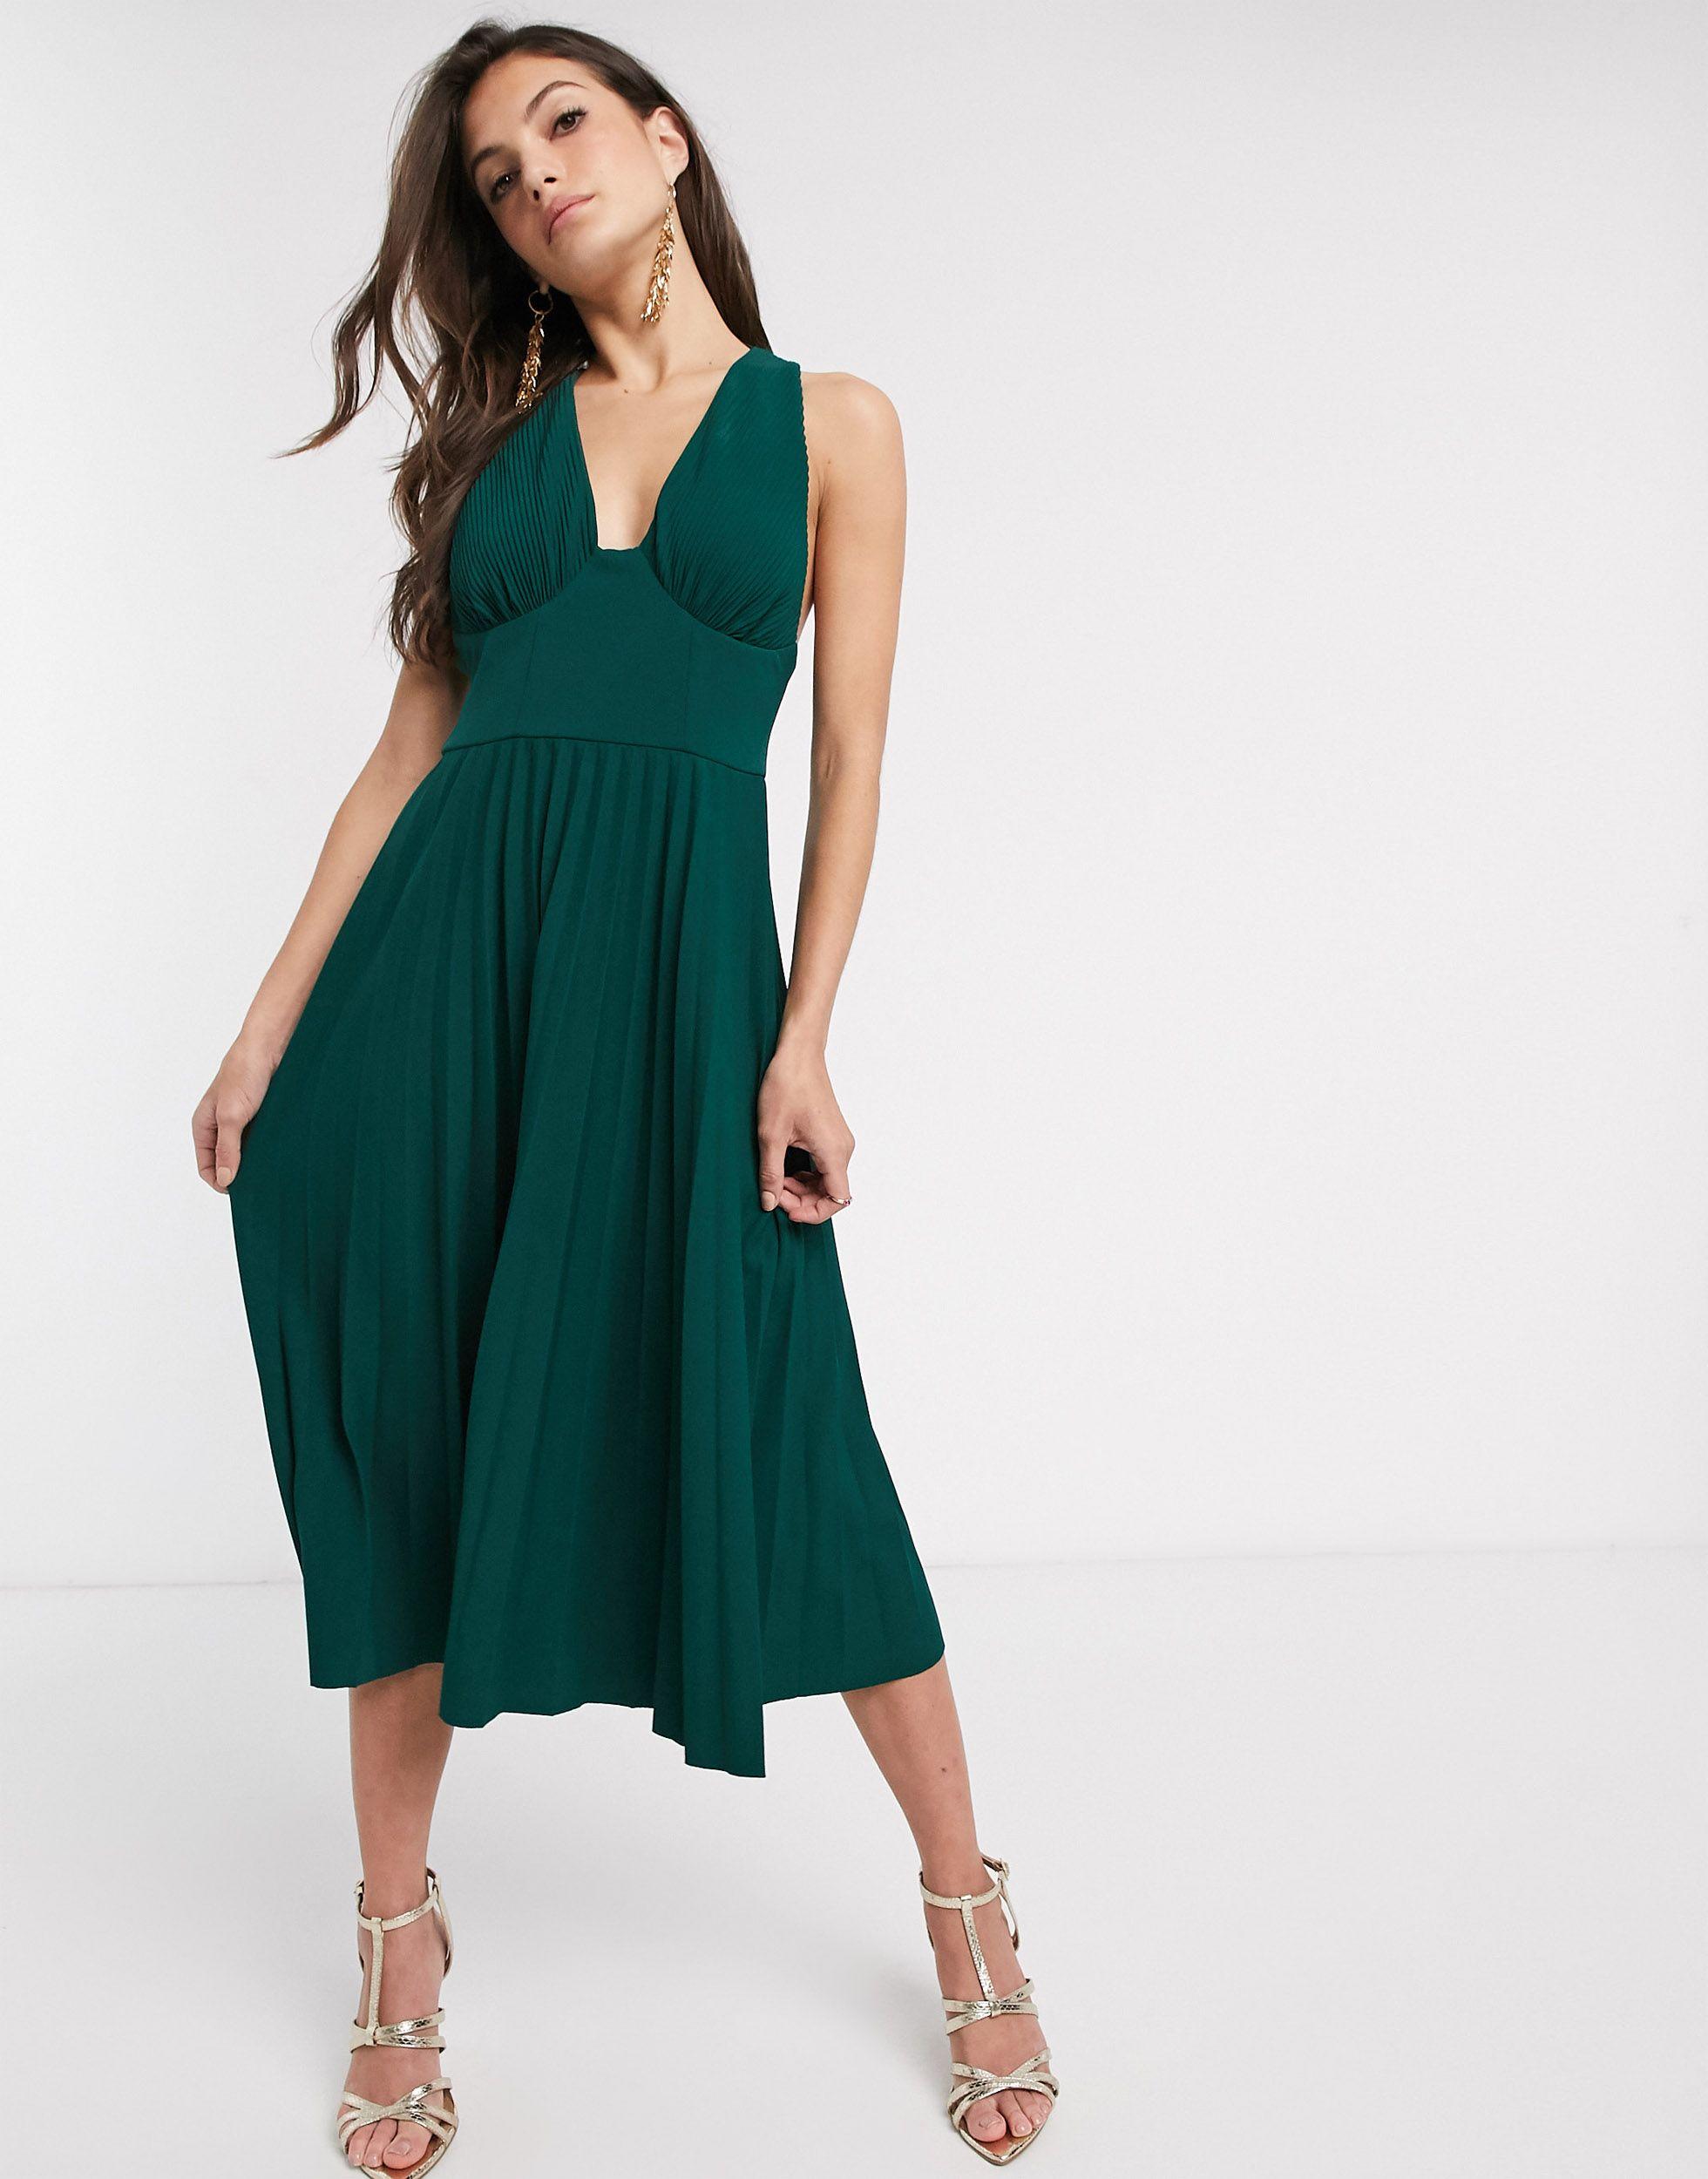 ASOS Design Corset Bandeau Midi Dress in Washed Fabric with Drape Detail Skirt in khaki-Green